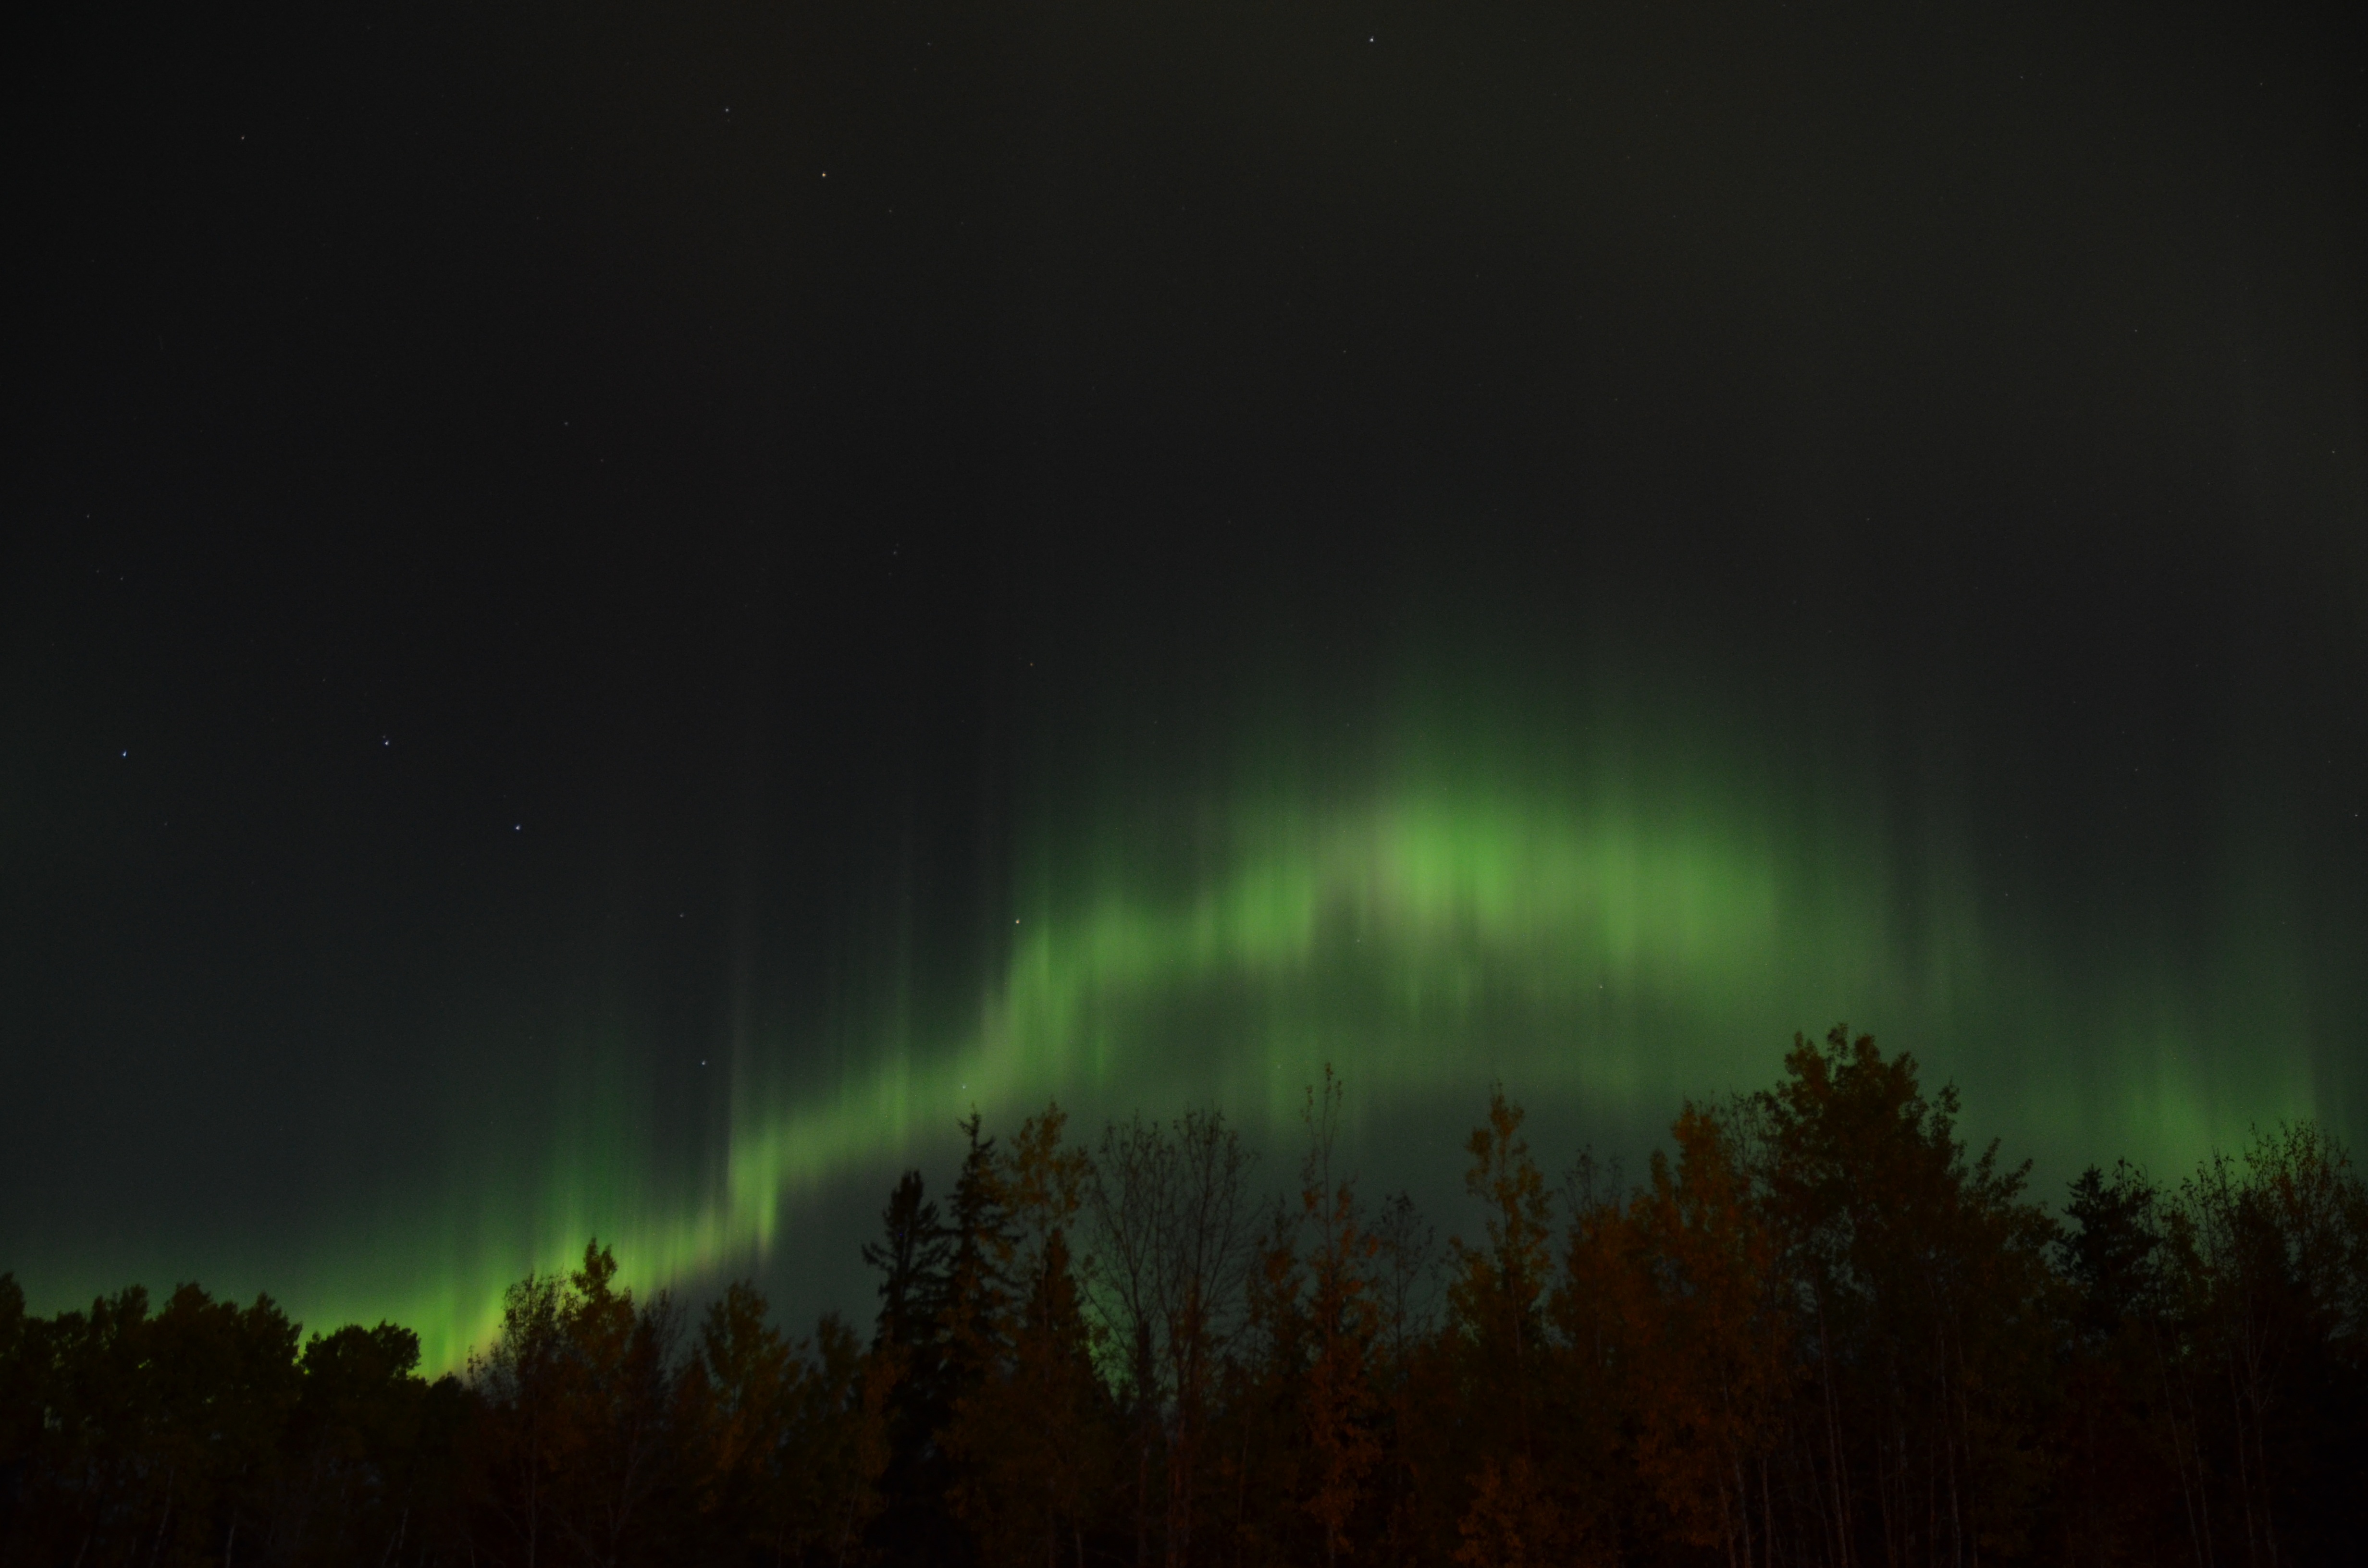 The Northern Lights in Canada have decorated the sky in green